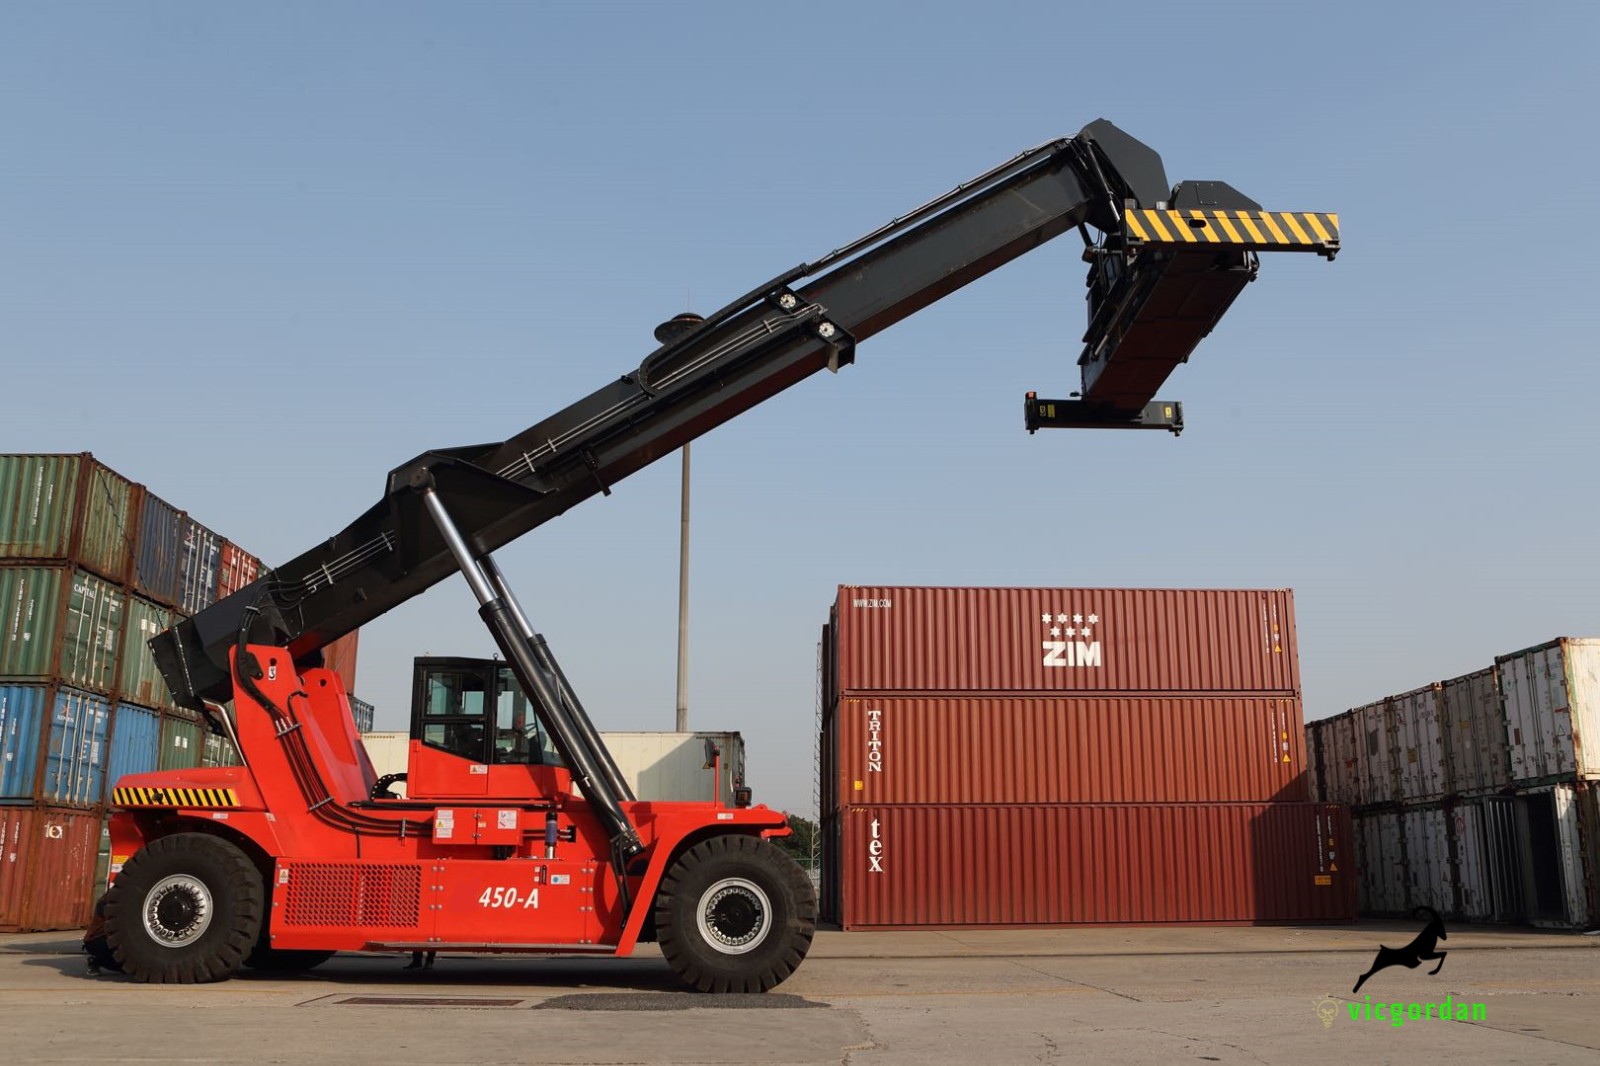 Vicgordan 45 ton reach stacker is going to South America with Cummins engine to our customer’s container yard